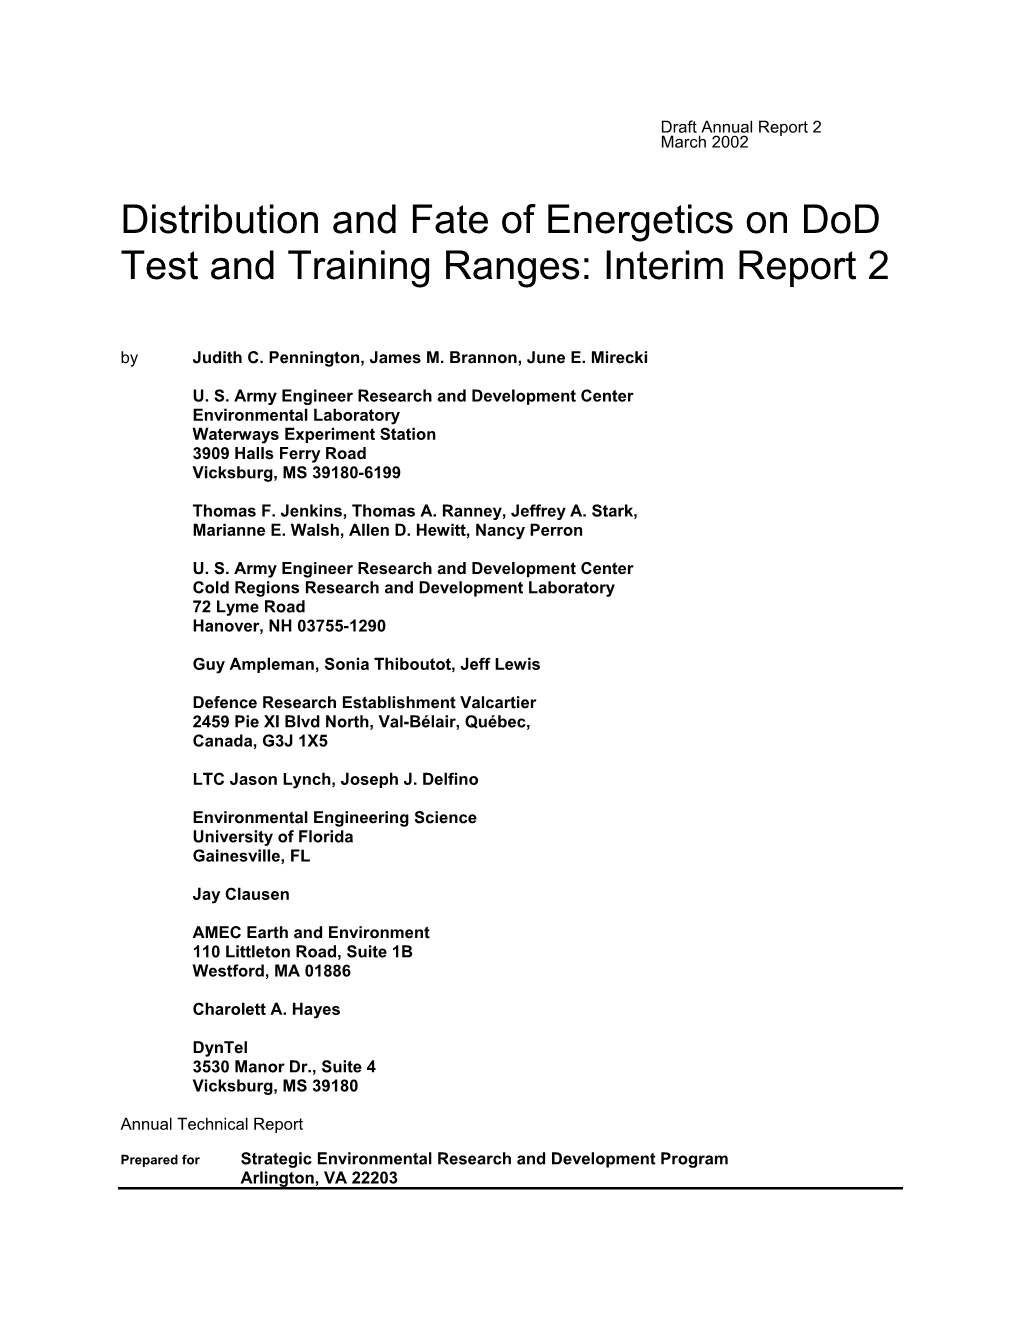 Distribution and Fate of Energetics on Dod Test and Training Ranges: Interim Report 2